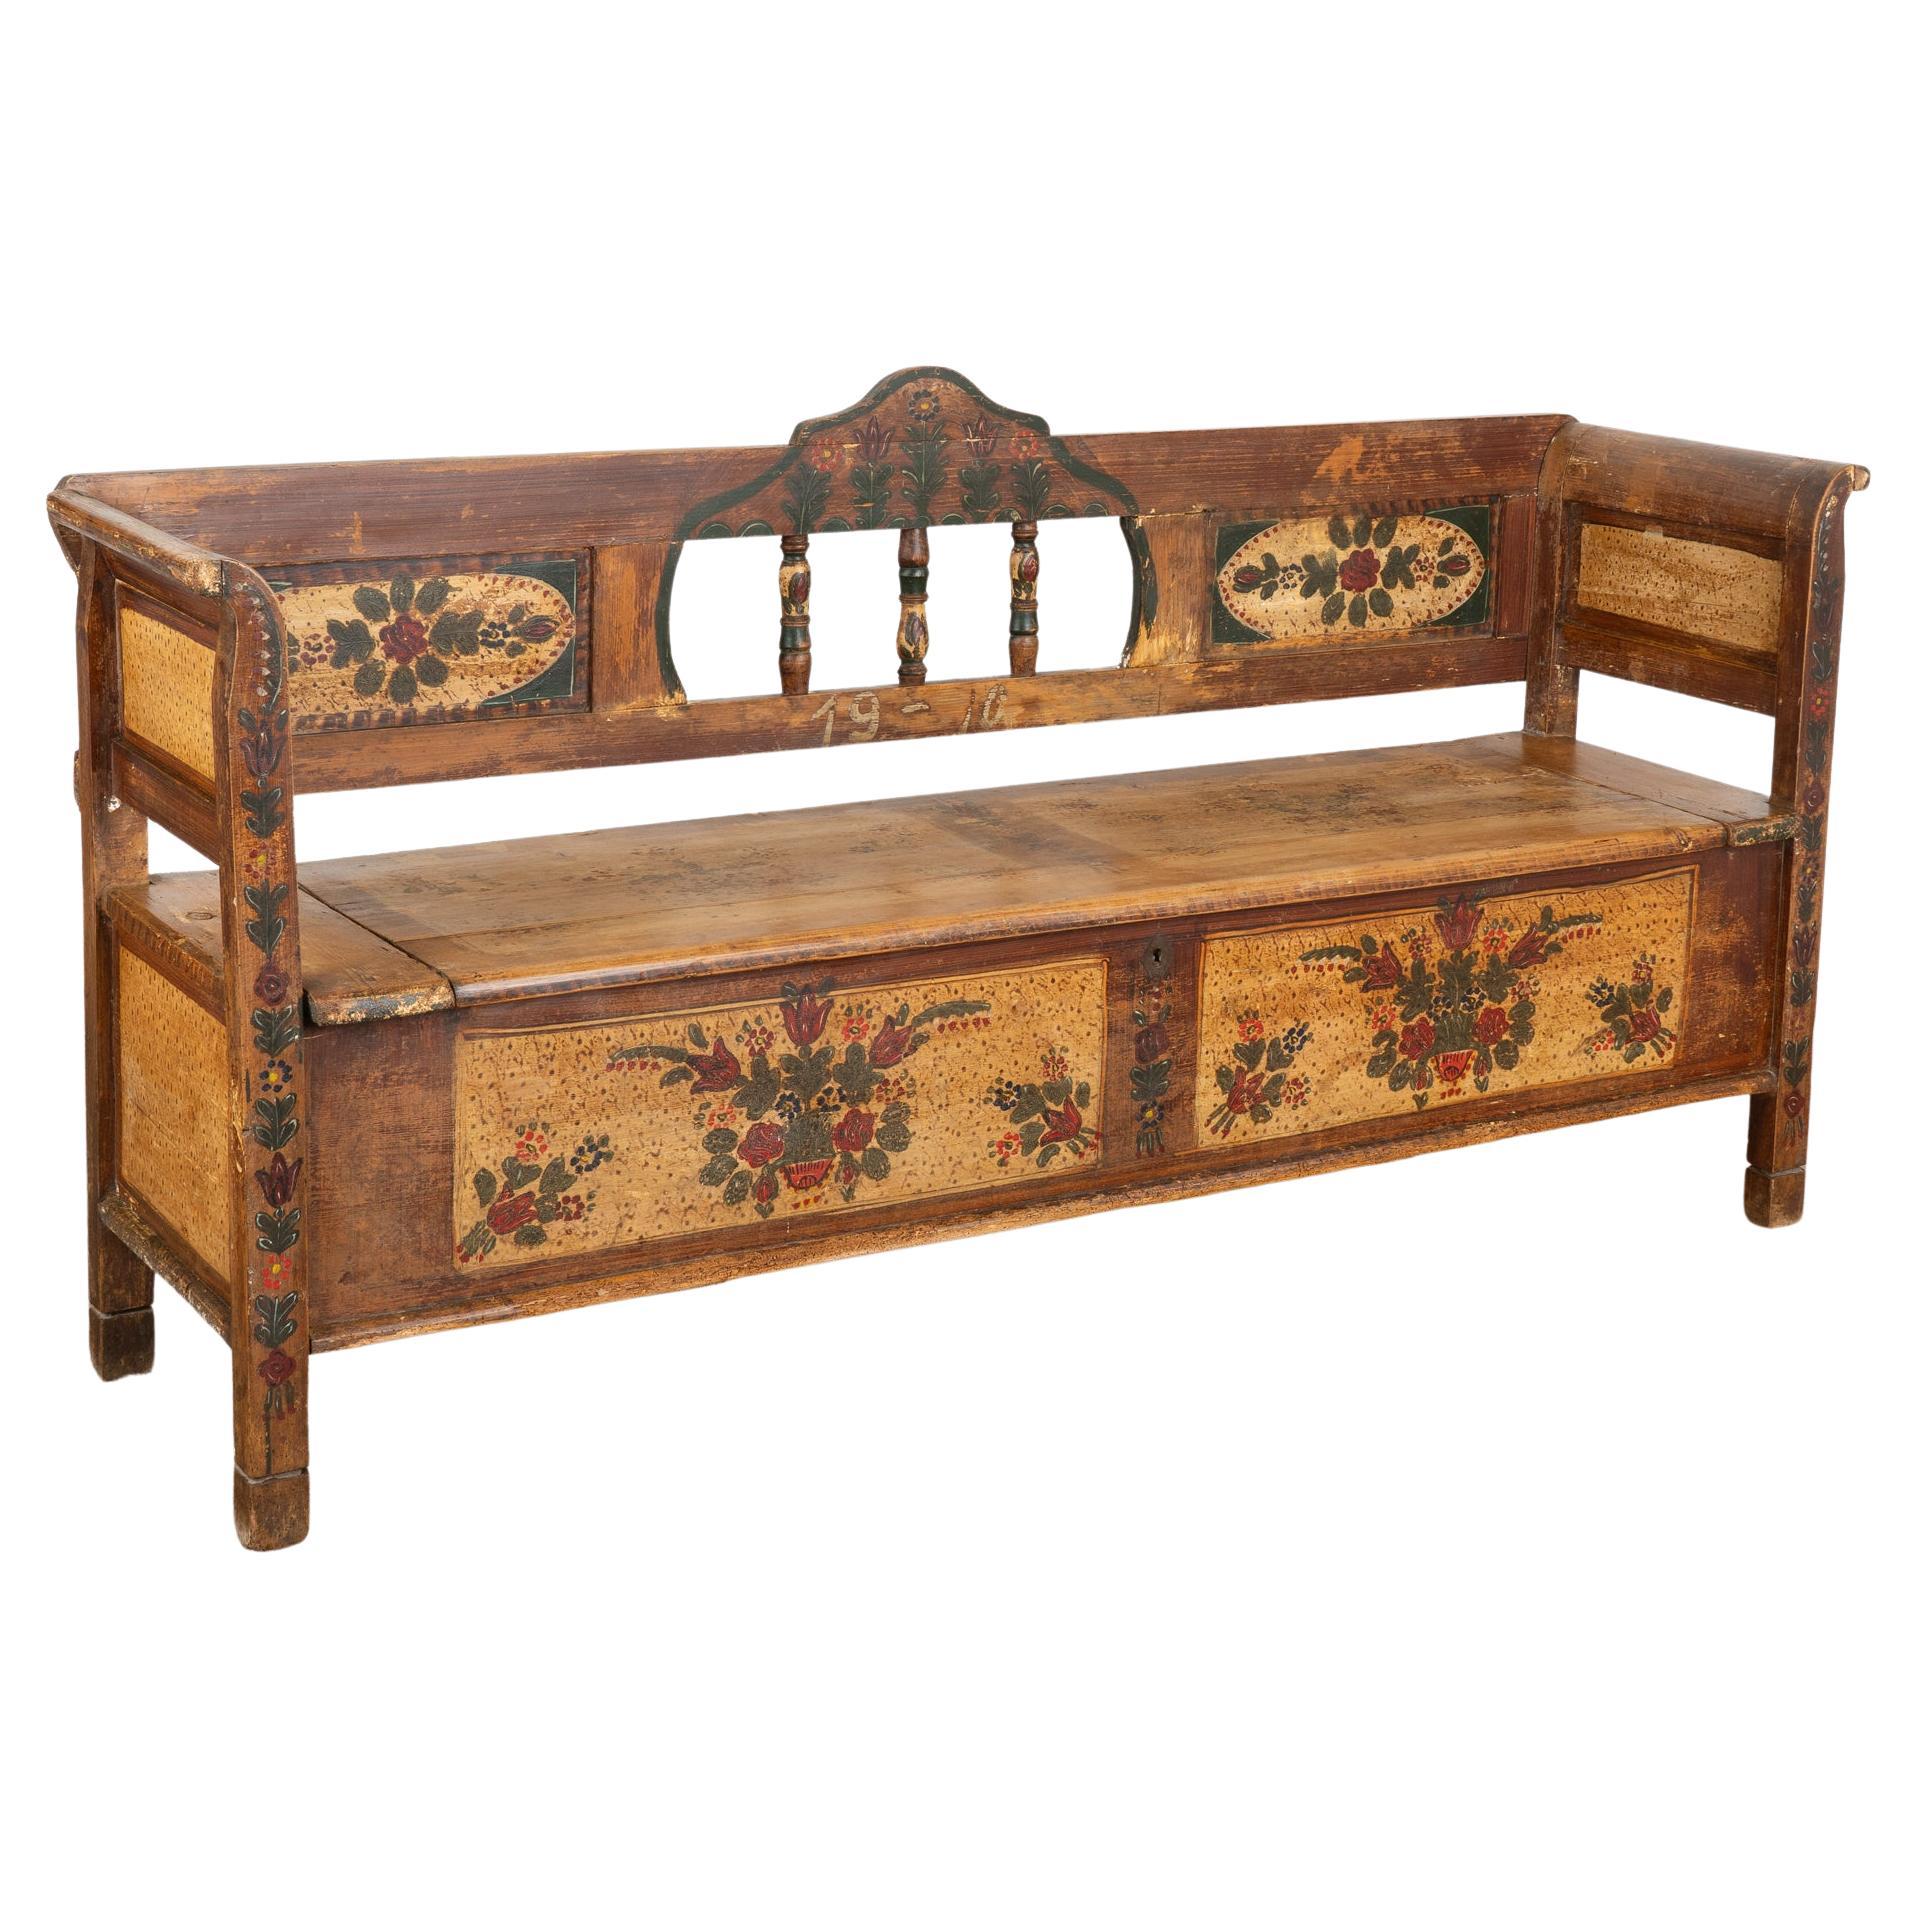 Original Painted Pine Bench With Storage, Hungary dated 1910